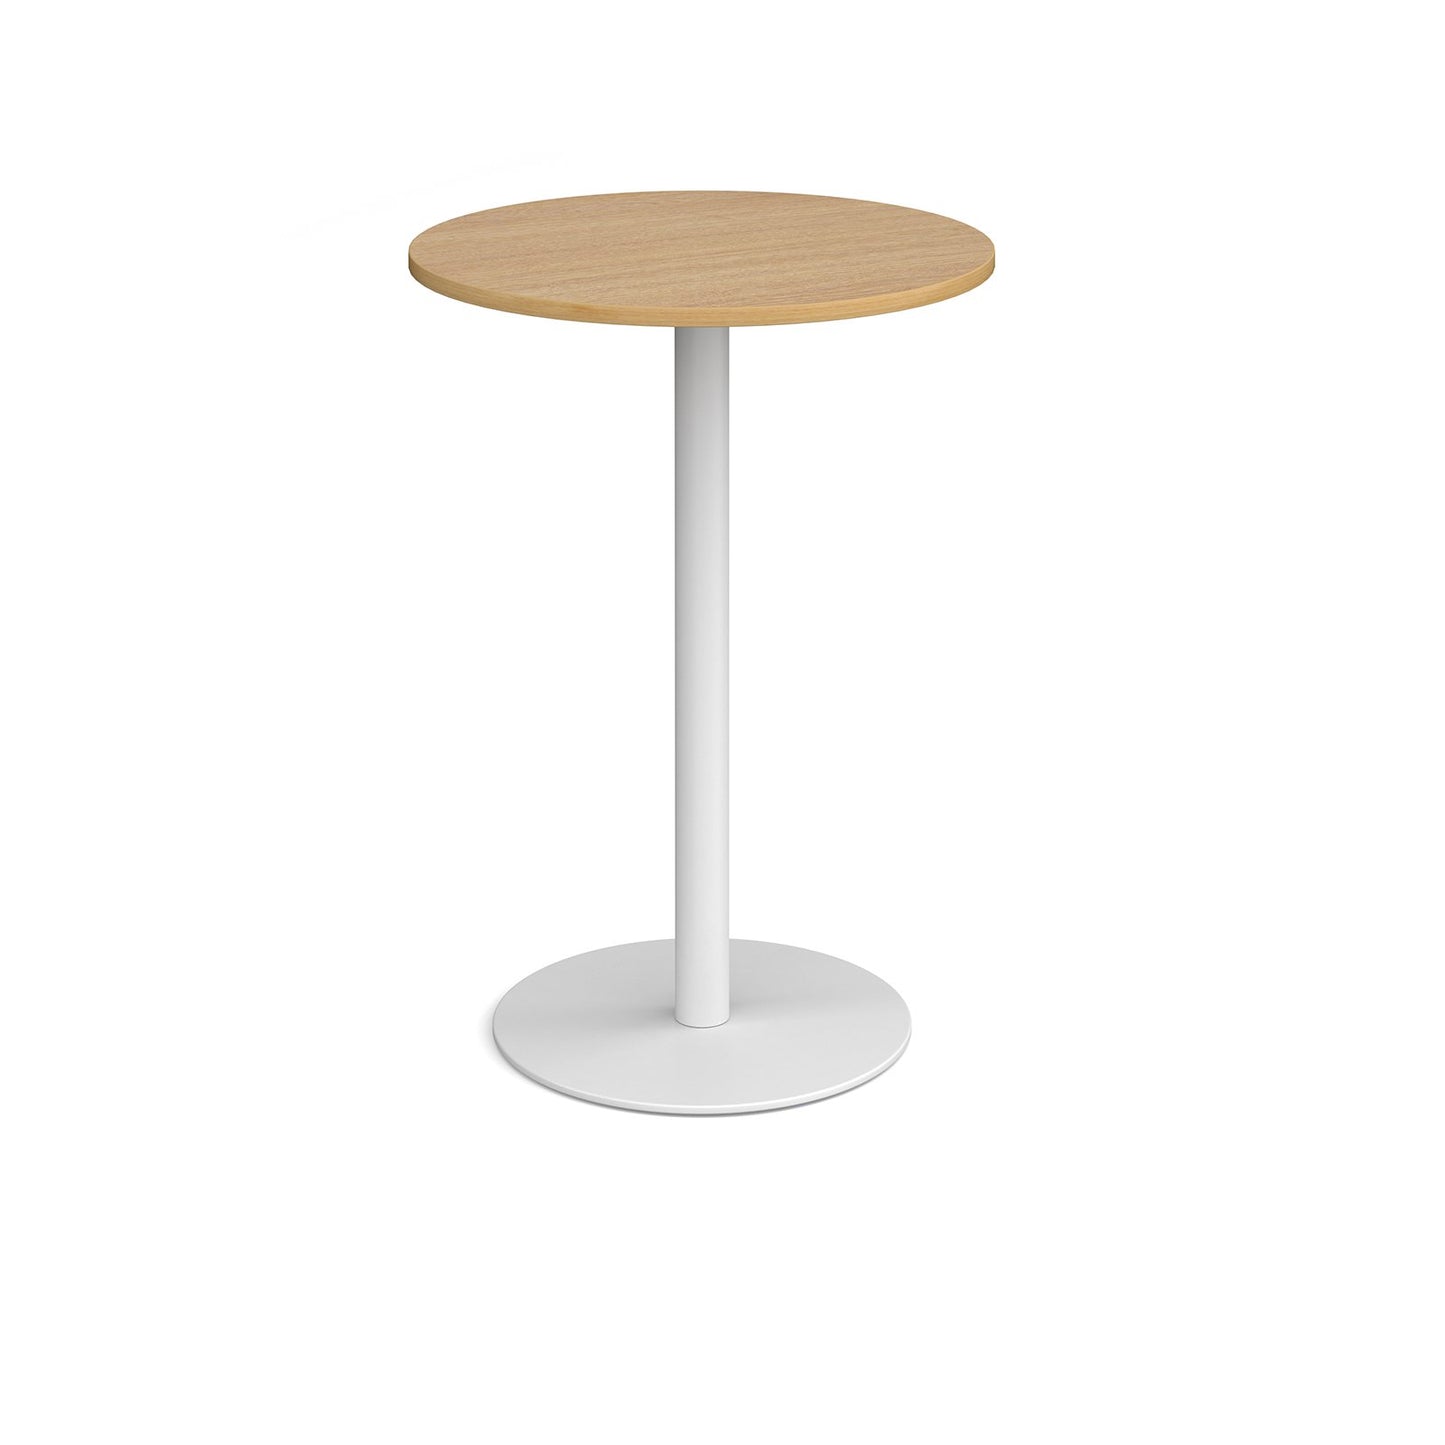 Monza circular poseur table with flat round base